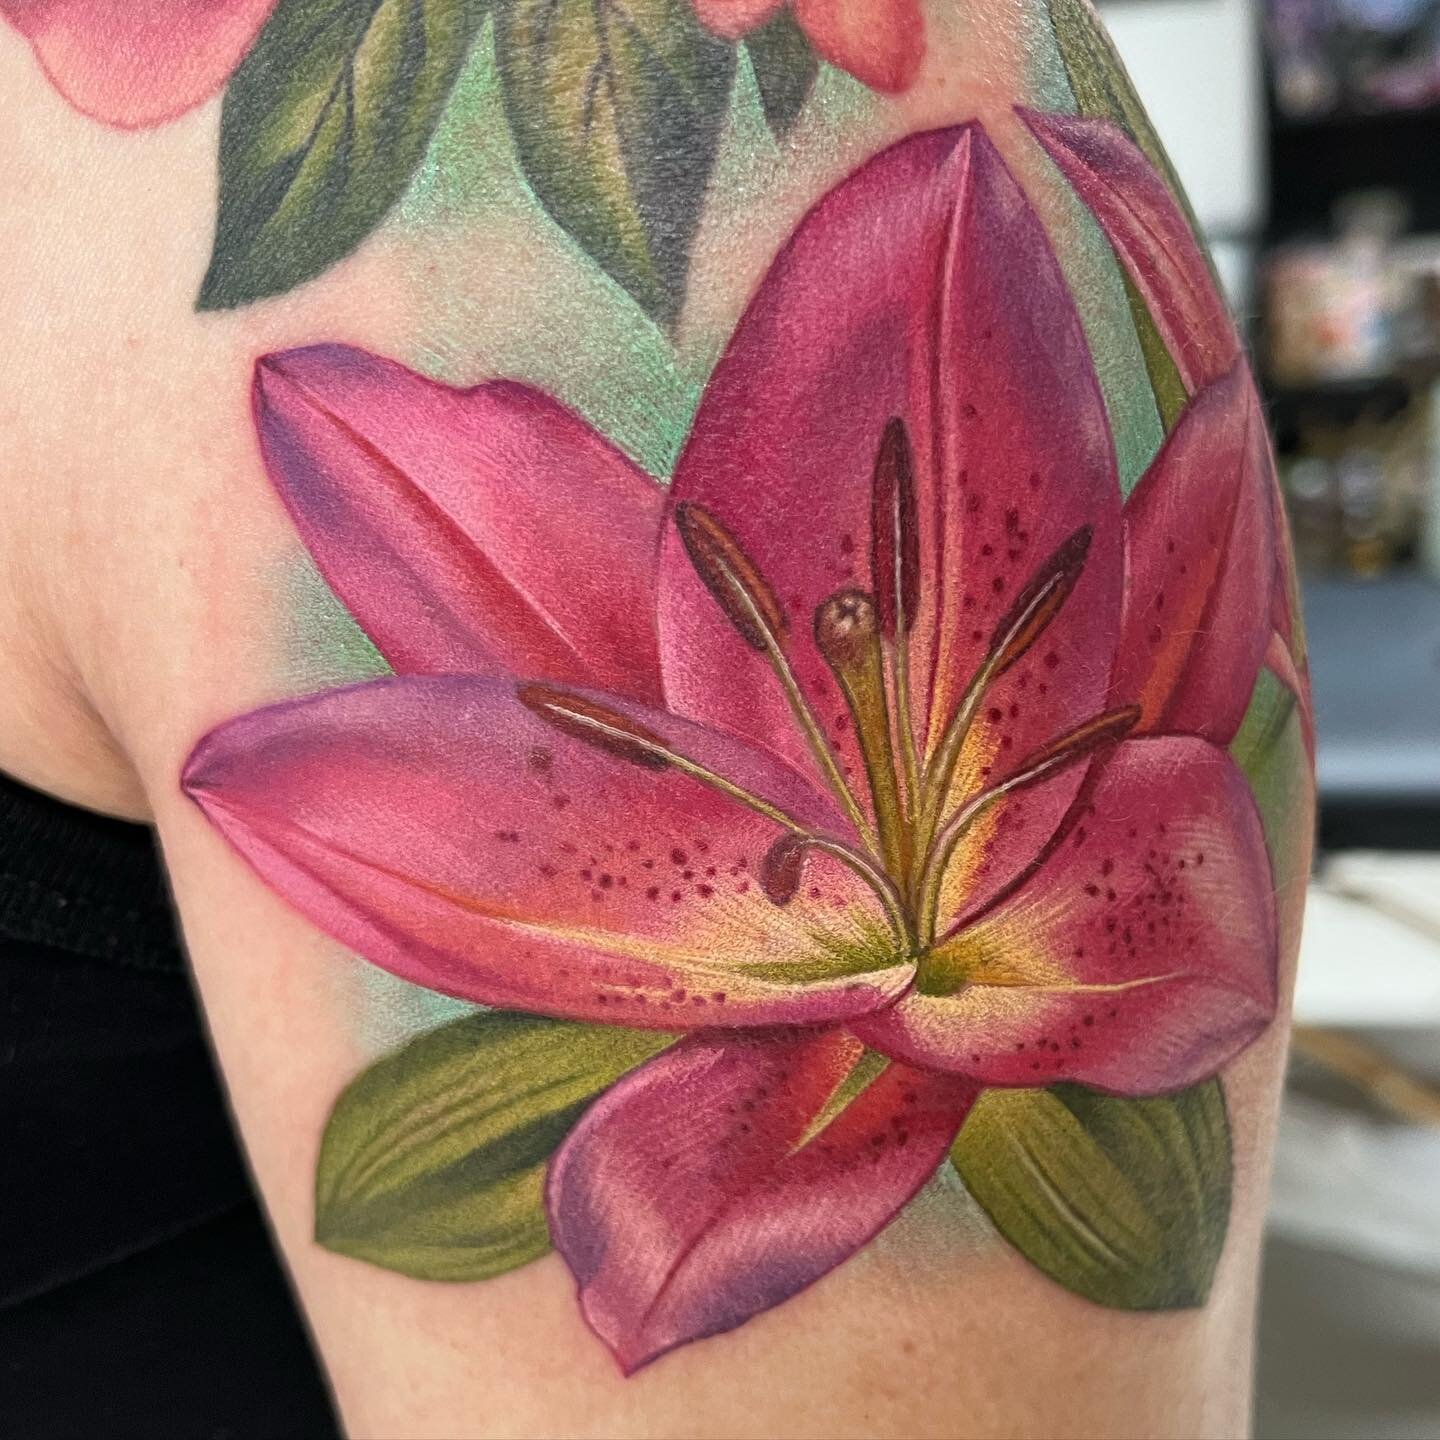 Lilies for Ditte 💫
Thank you 😊

Made with @fusion_ink and @killerinktattoo supplies in #edinburgh 

#flowers #lilies #floraltattoo #nature #lilytattoo #tattoo #tattoos #edinburghtattooartist #edinburghtattoostudio #pink #floral